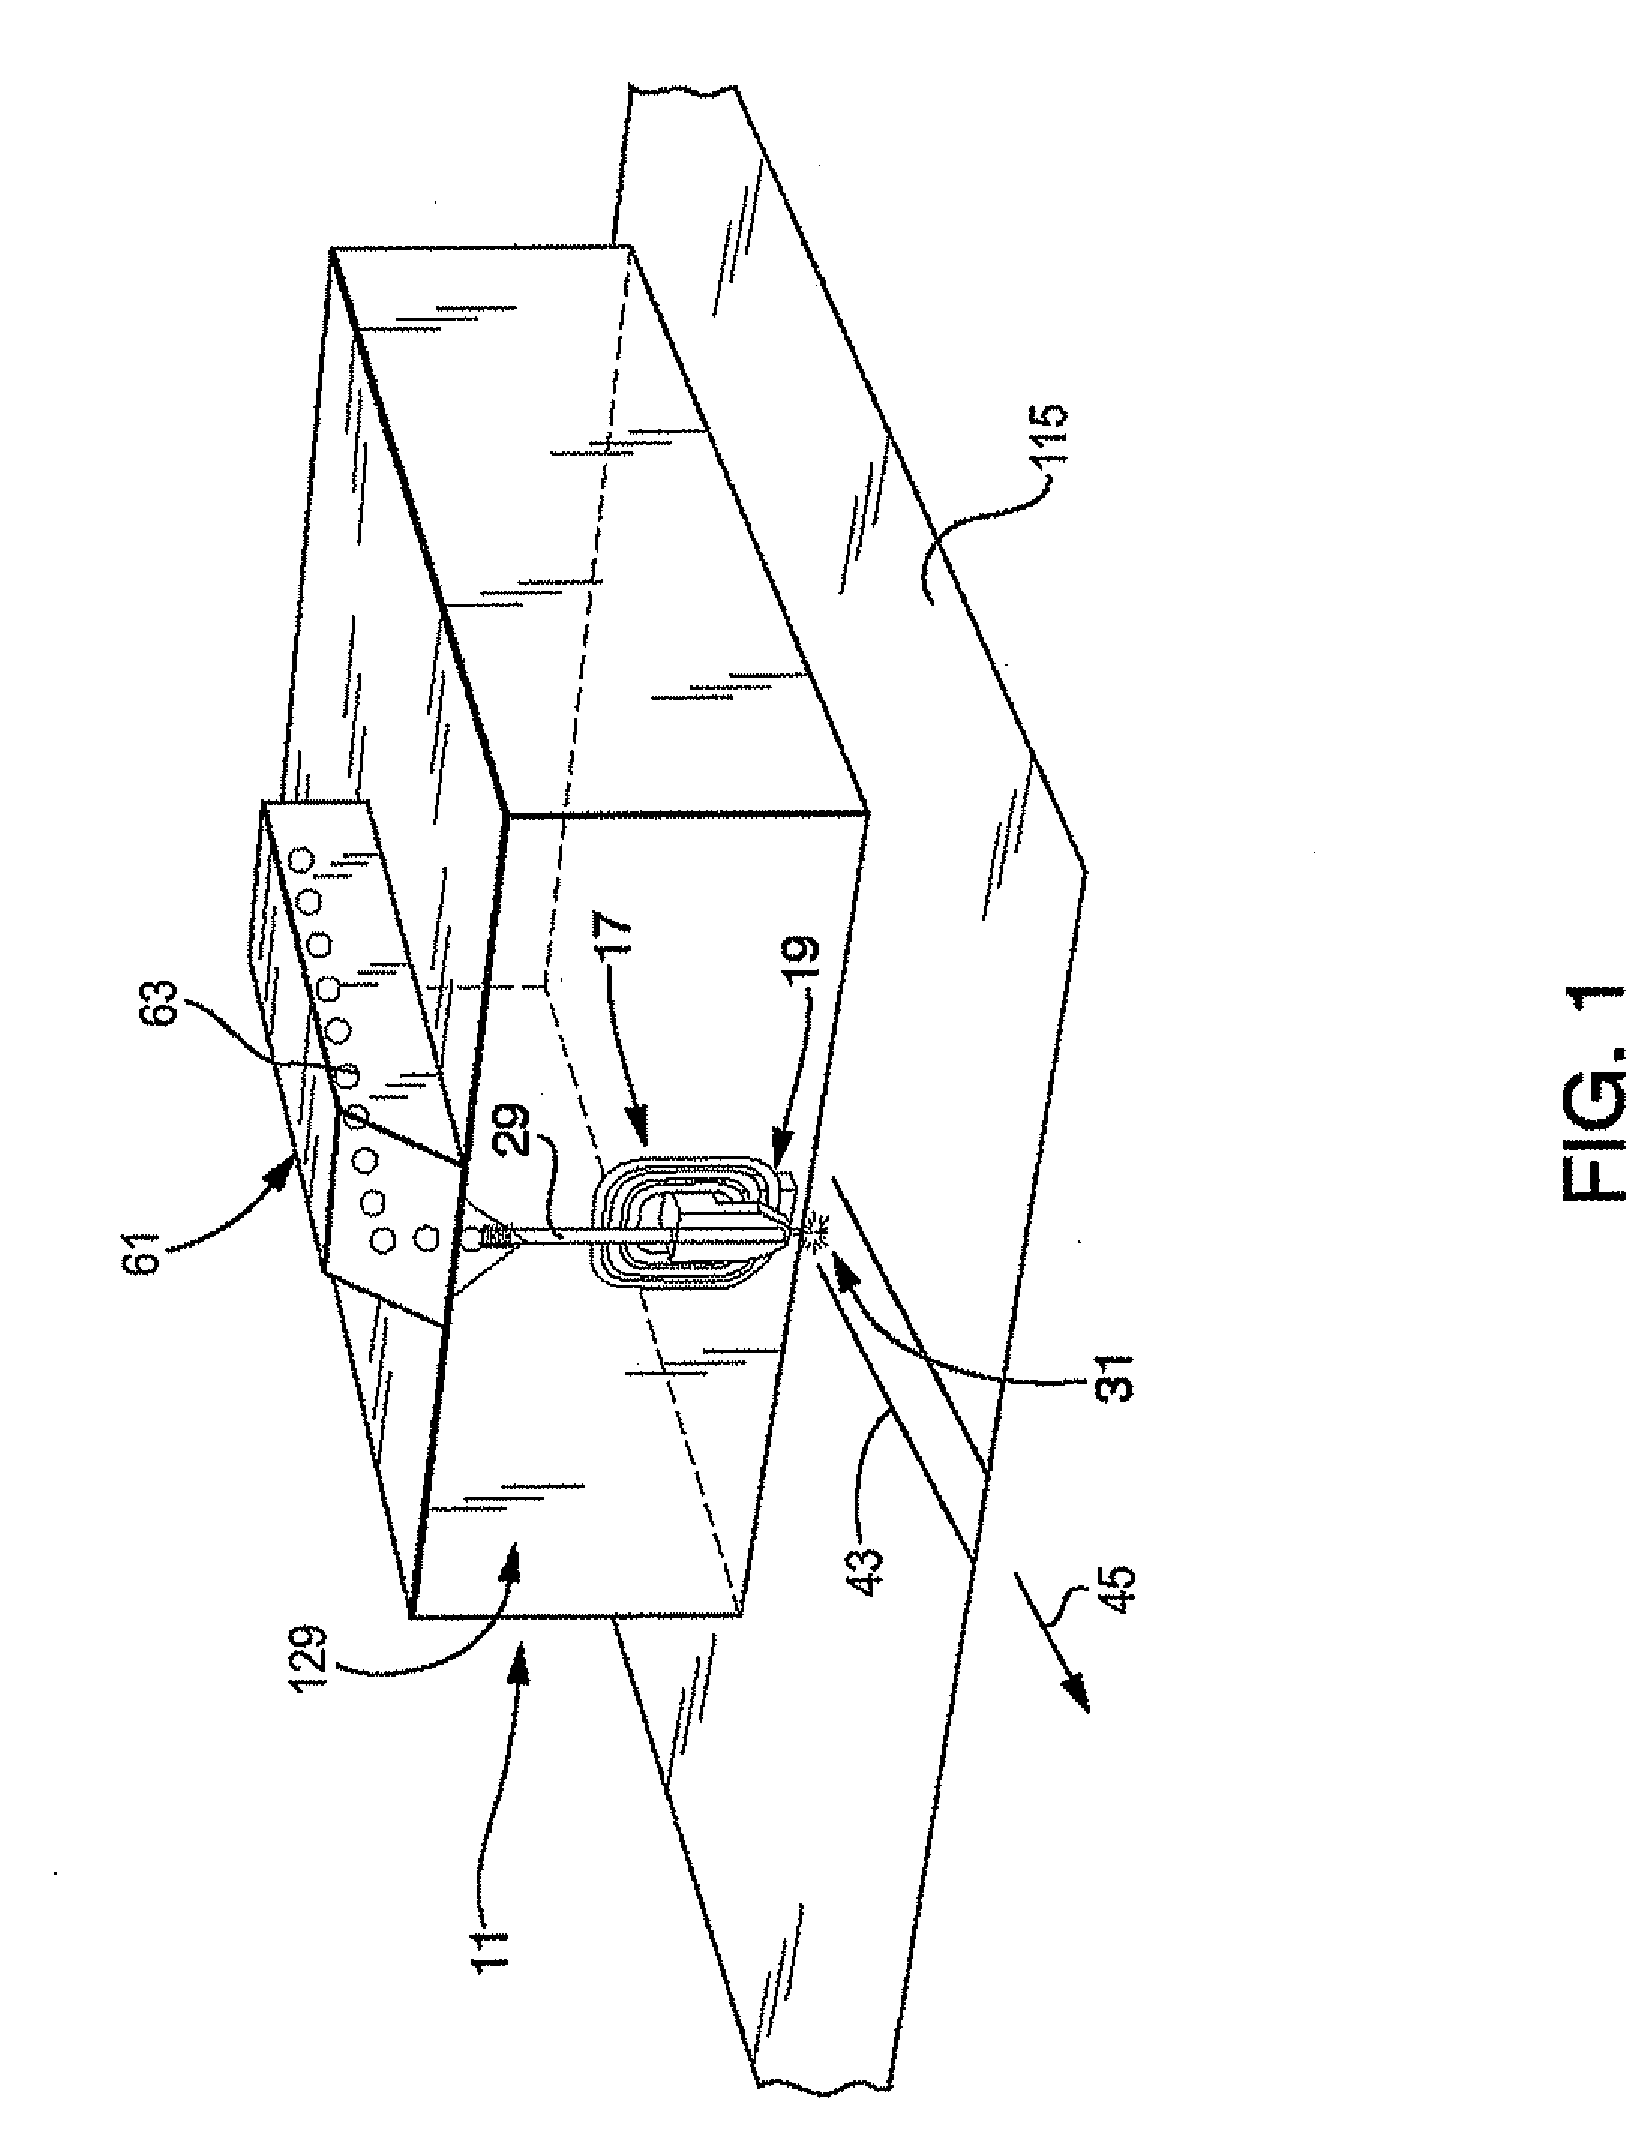 System, method and apparatus for internal polarization rotation for horizontal cavity, surface emitting laser beam for thermally assisted recording in disk drive